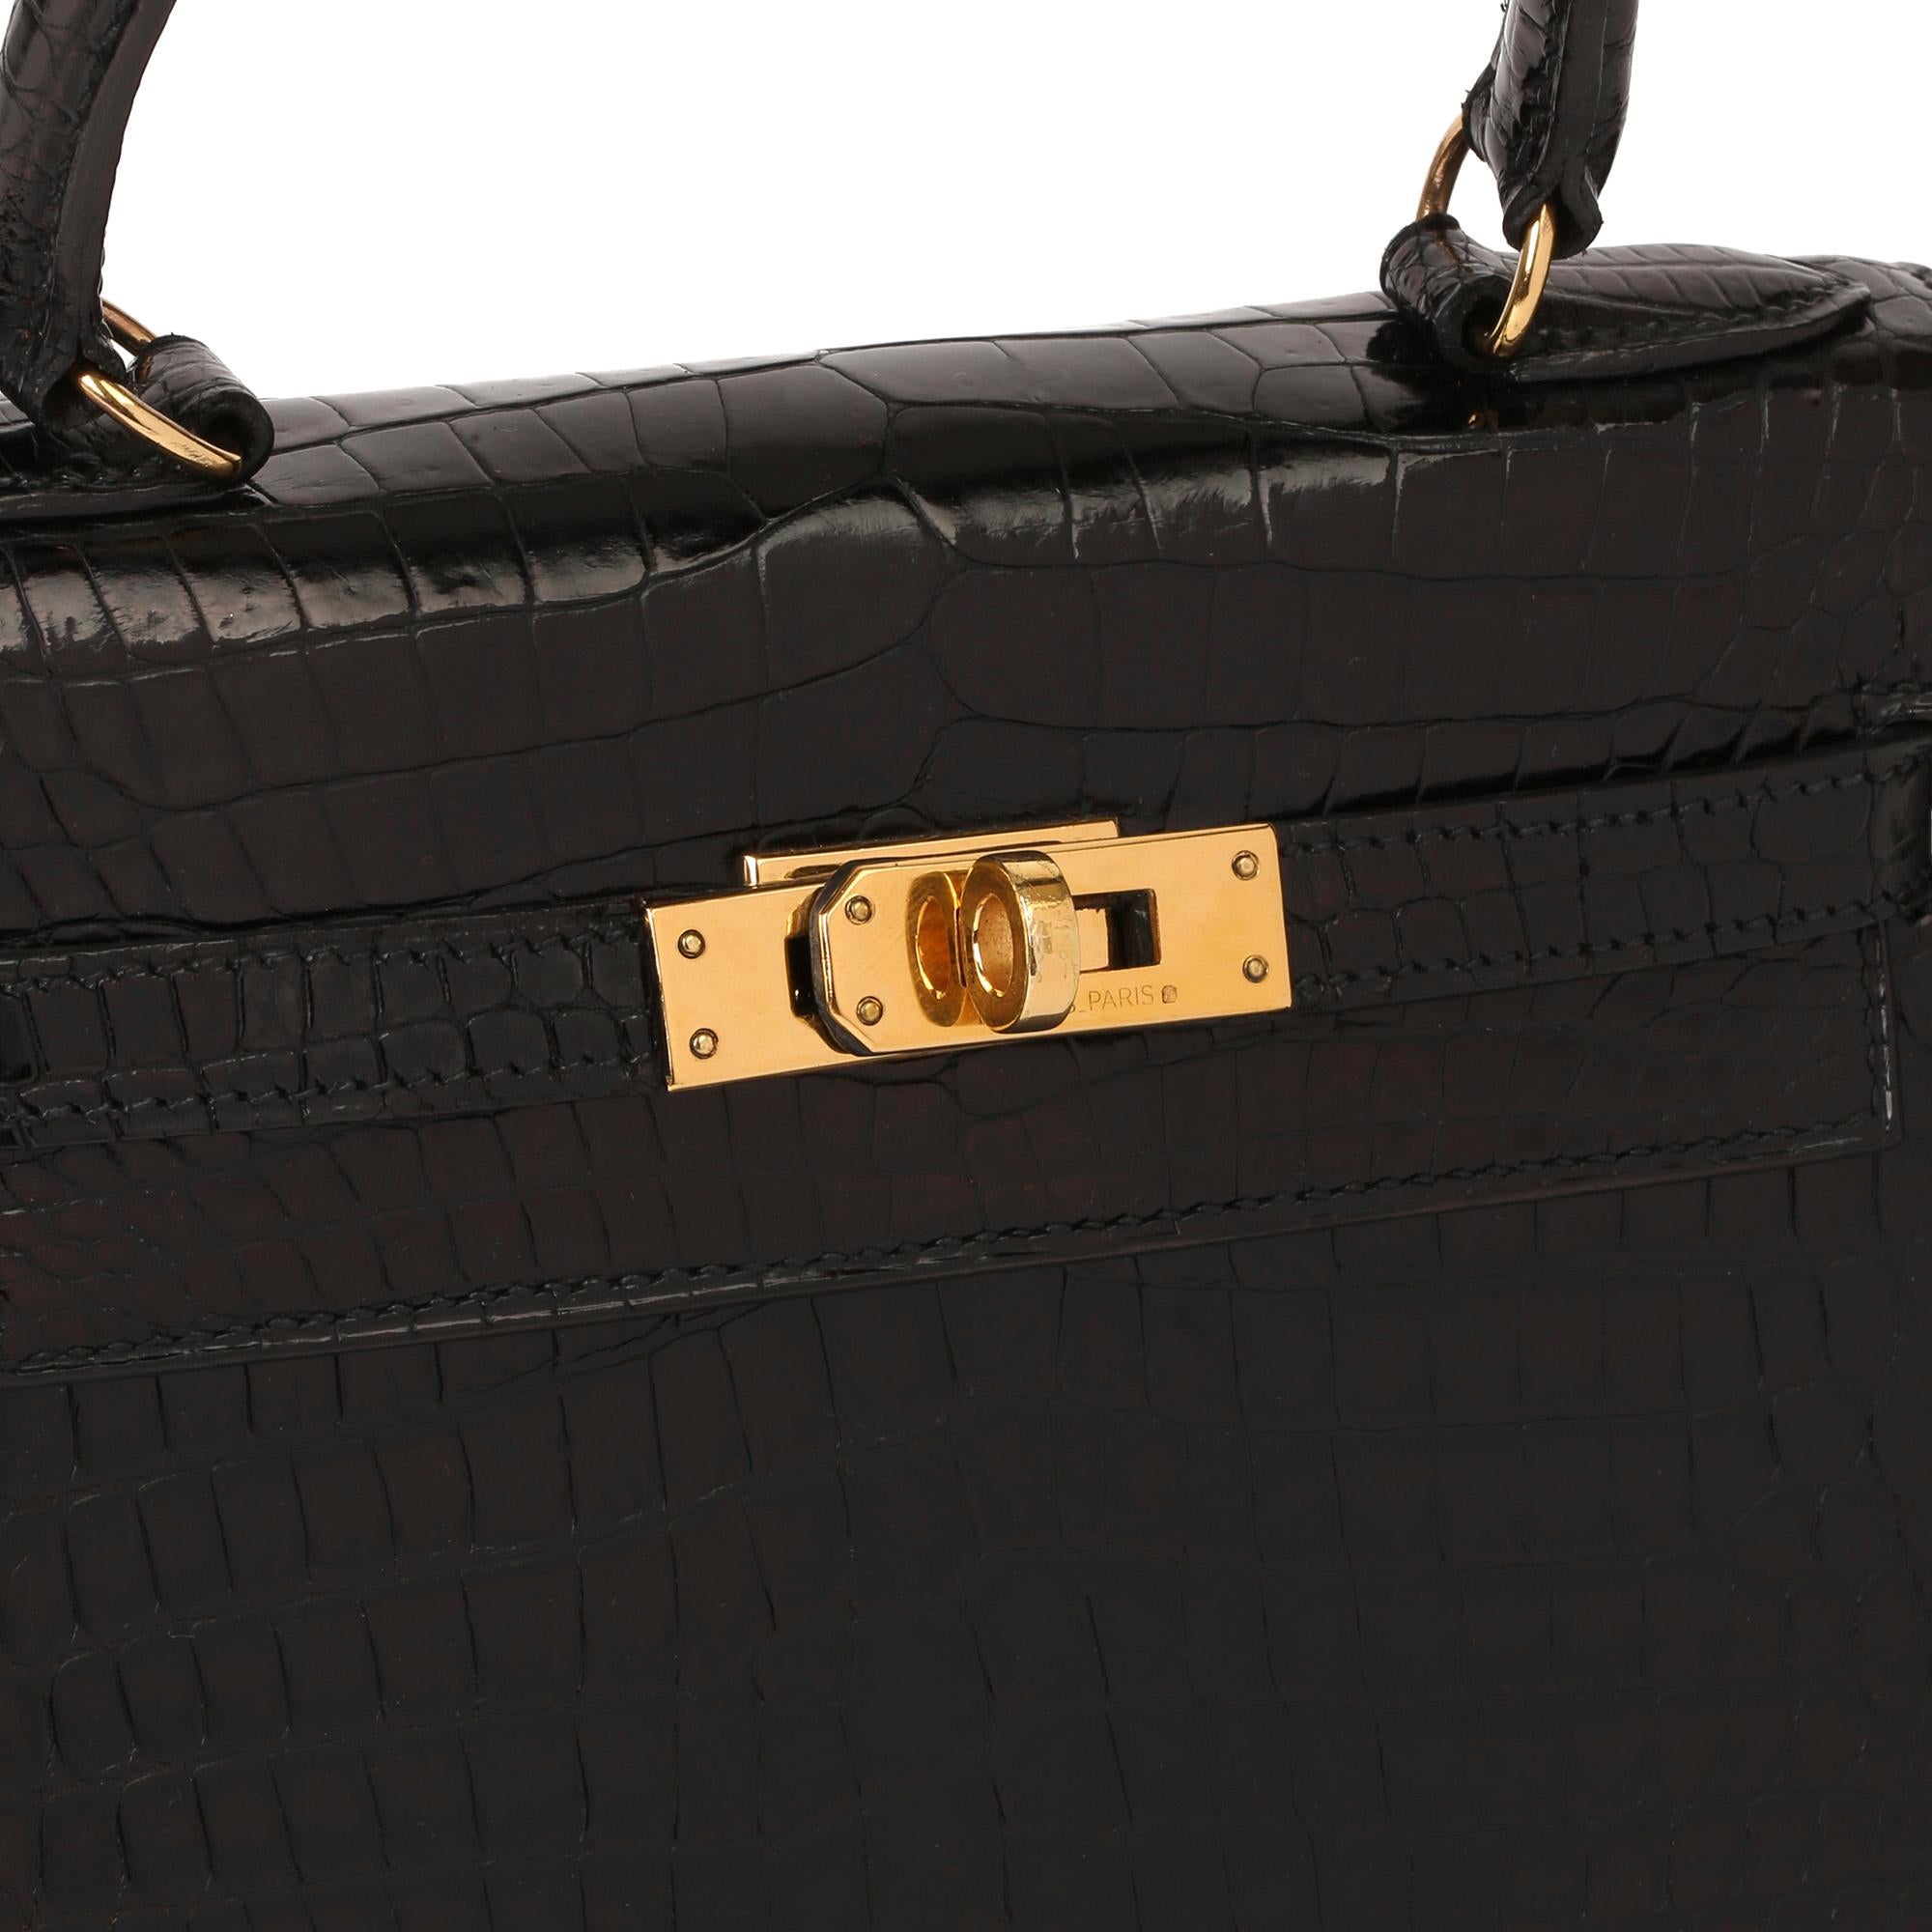 HERMÈS
Black Shiny Porosus Crocodile Leather Vintage Kelly 20cm Sellier

Xupes Reference: HBJJLG022
Serial Number: (W)
Age (Circa): 1993
Accompanied By: Hermès Dust Bag, Shoulder Strap
Authenticity Details: Date Stamp (Made in France)
Gender: